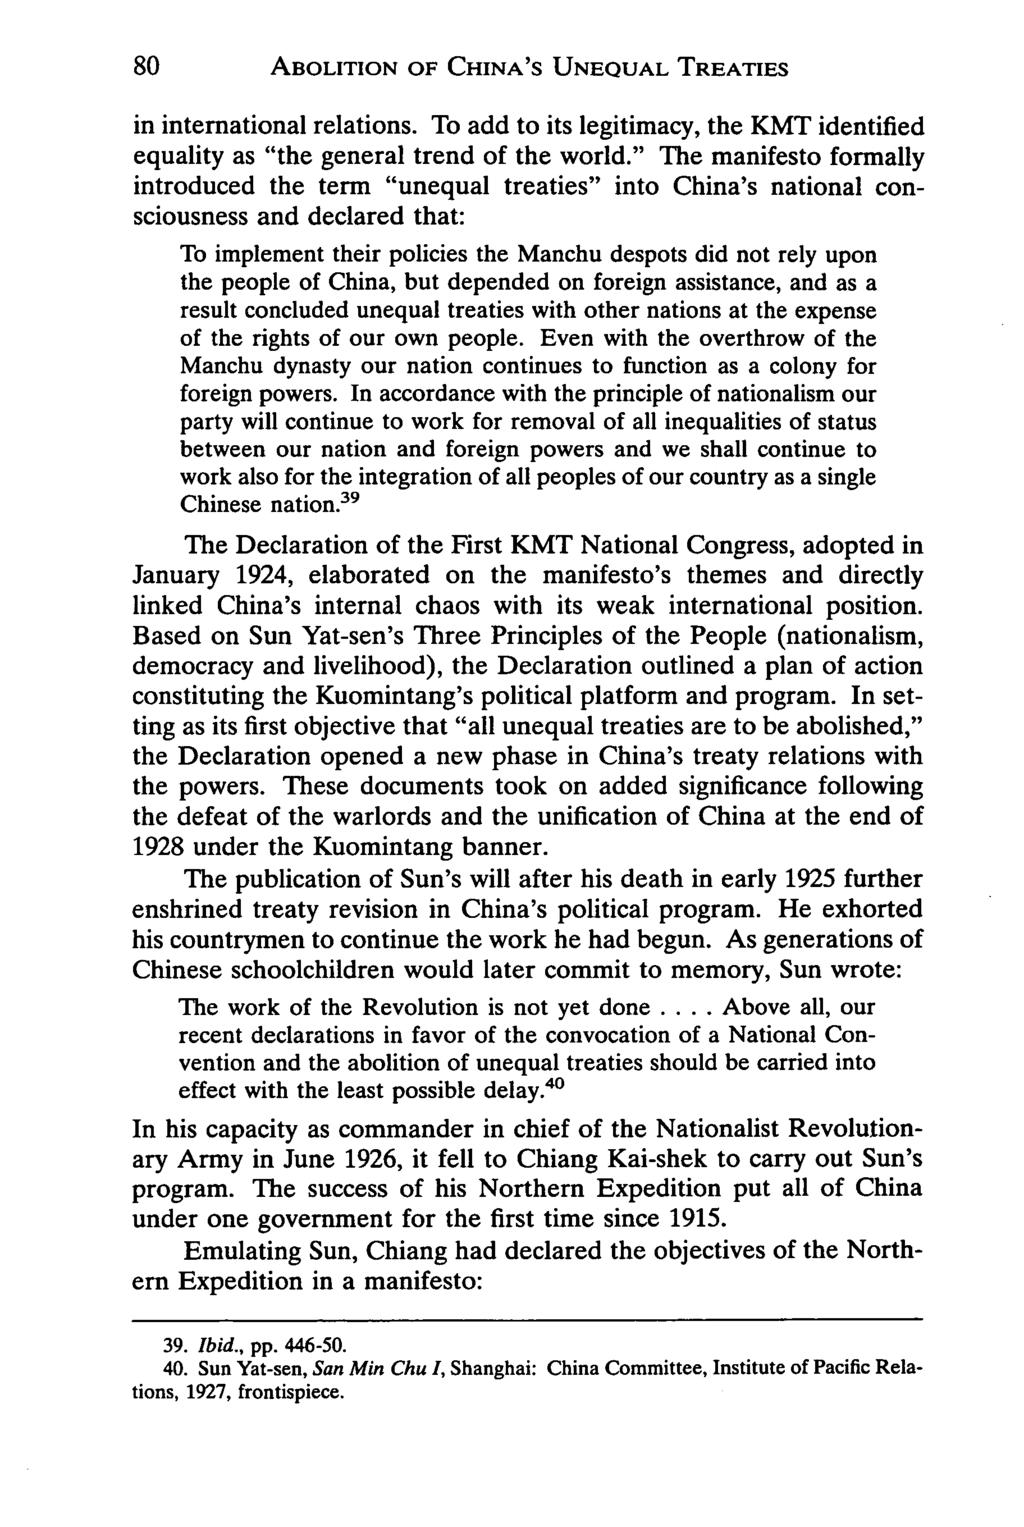 ABOLITION OF CHINA'S UNEQUAL TREATIES in international relations. To add to its legitimacy, the KMT identified equality as "the general trend of the world.